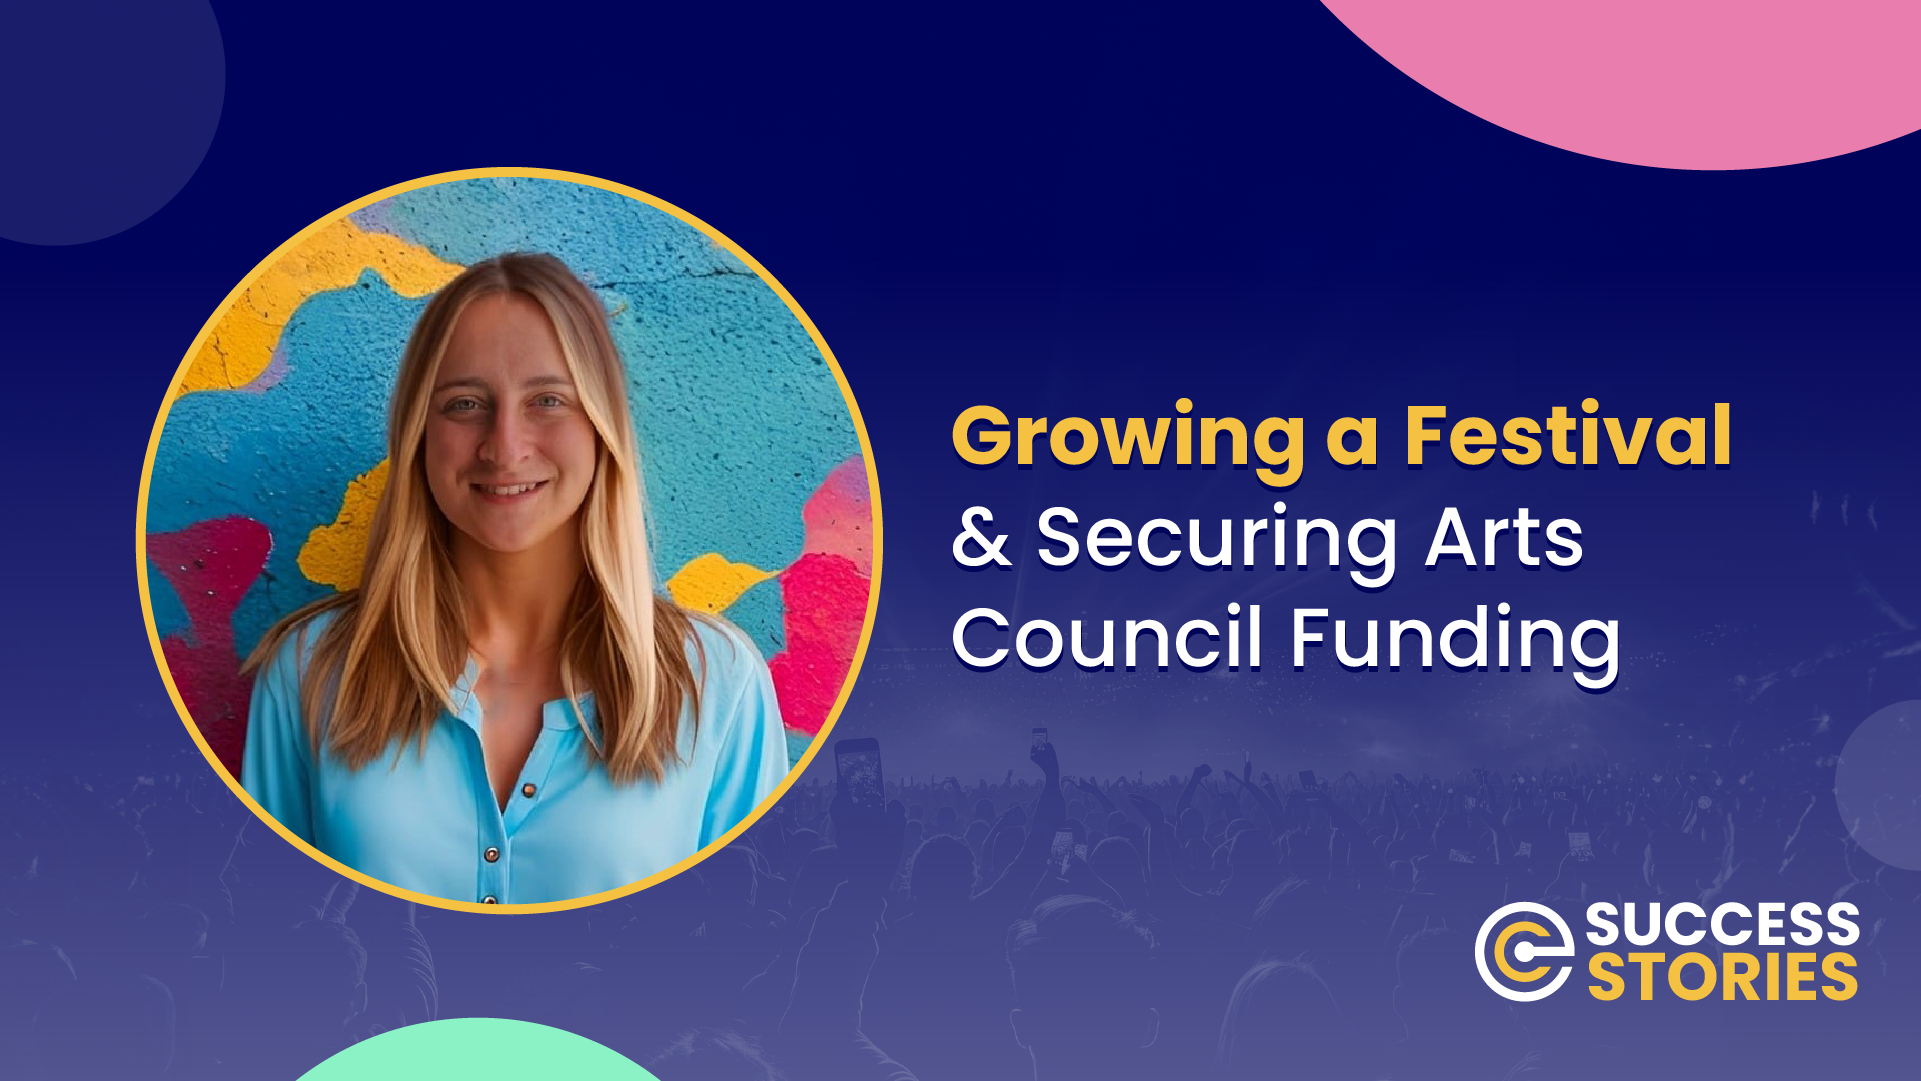  How I Grew a Festival & Secured Arts Council Funding